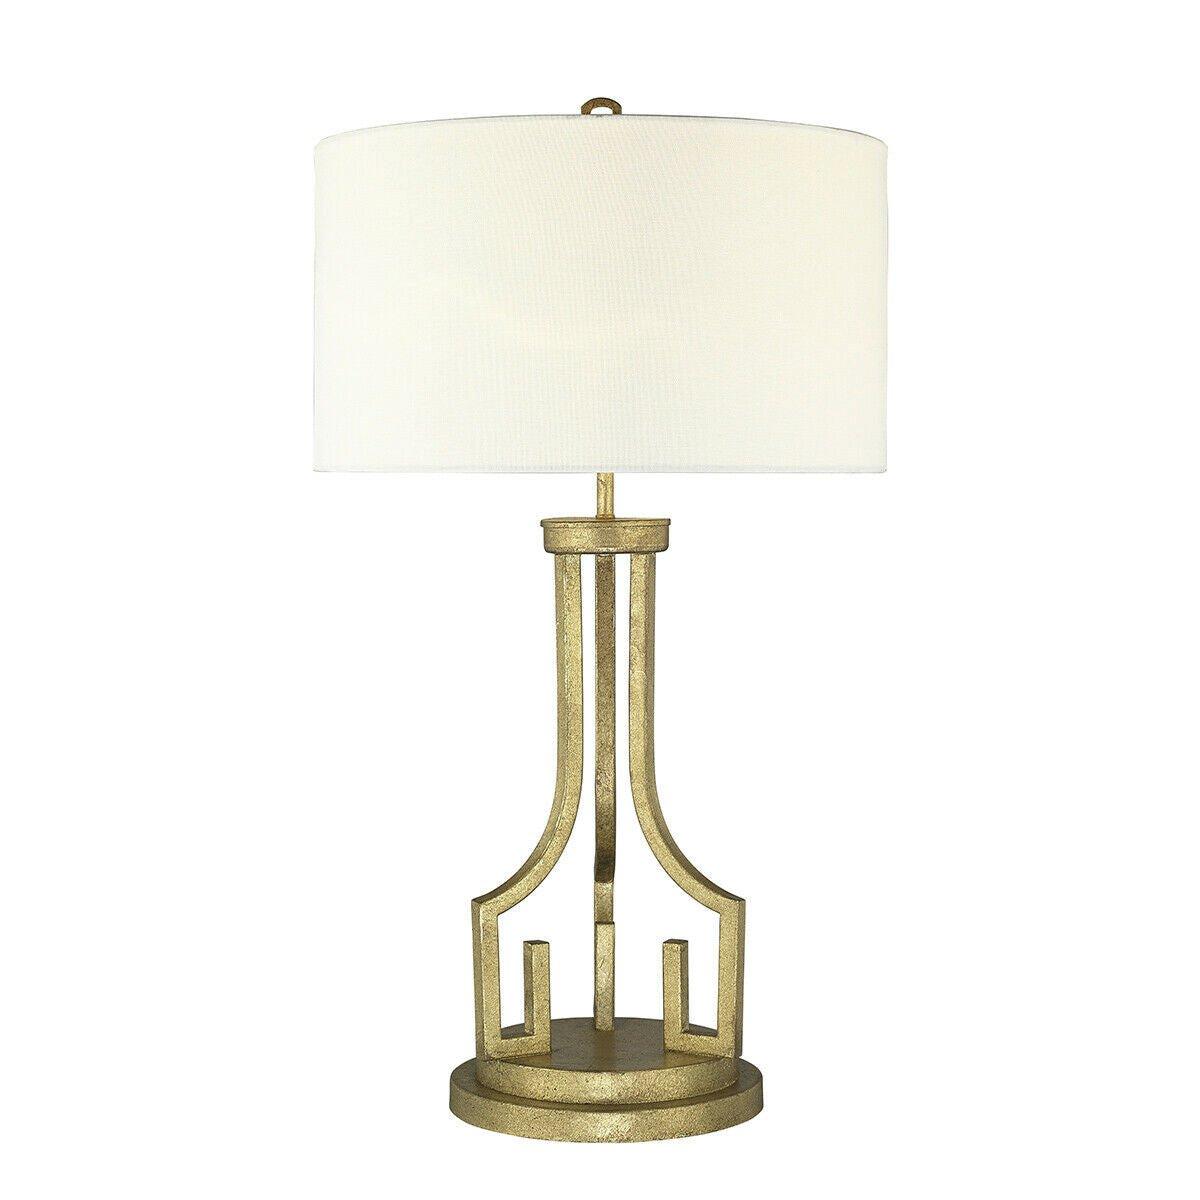 Table Lamp Grecian Key Motif Ivory Whie Linen ShadeDistressed Gold LED E27 100W